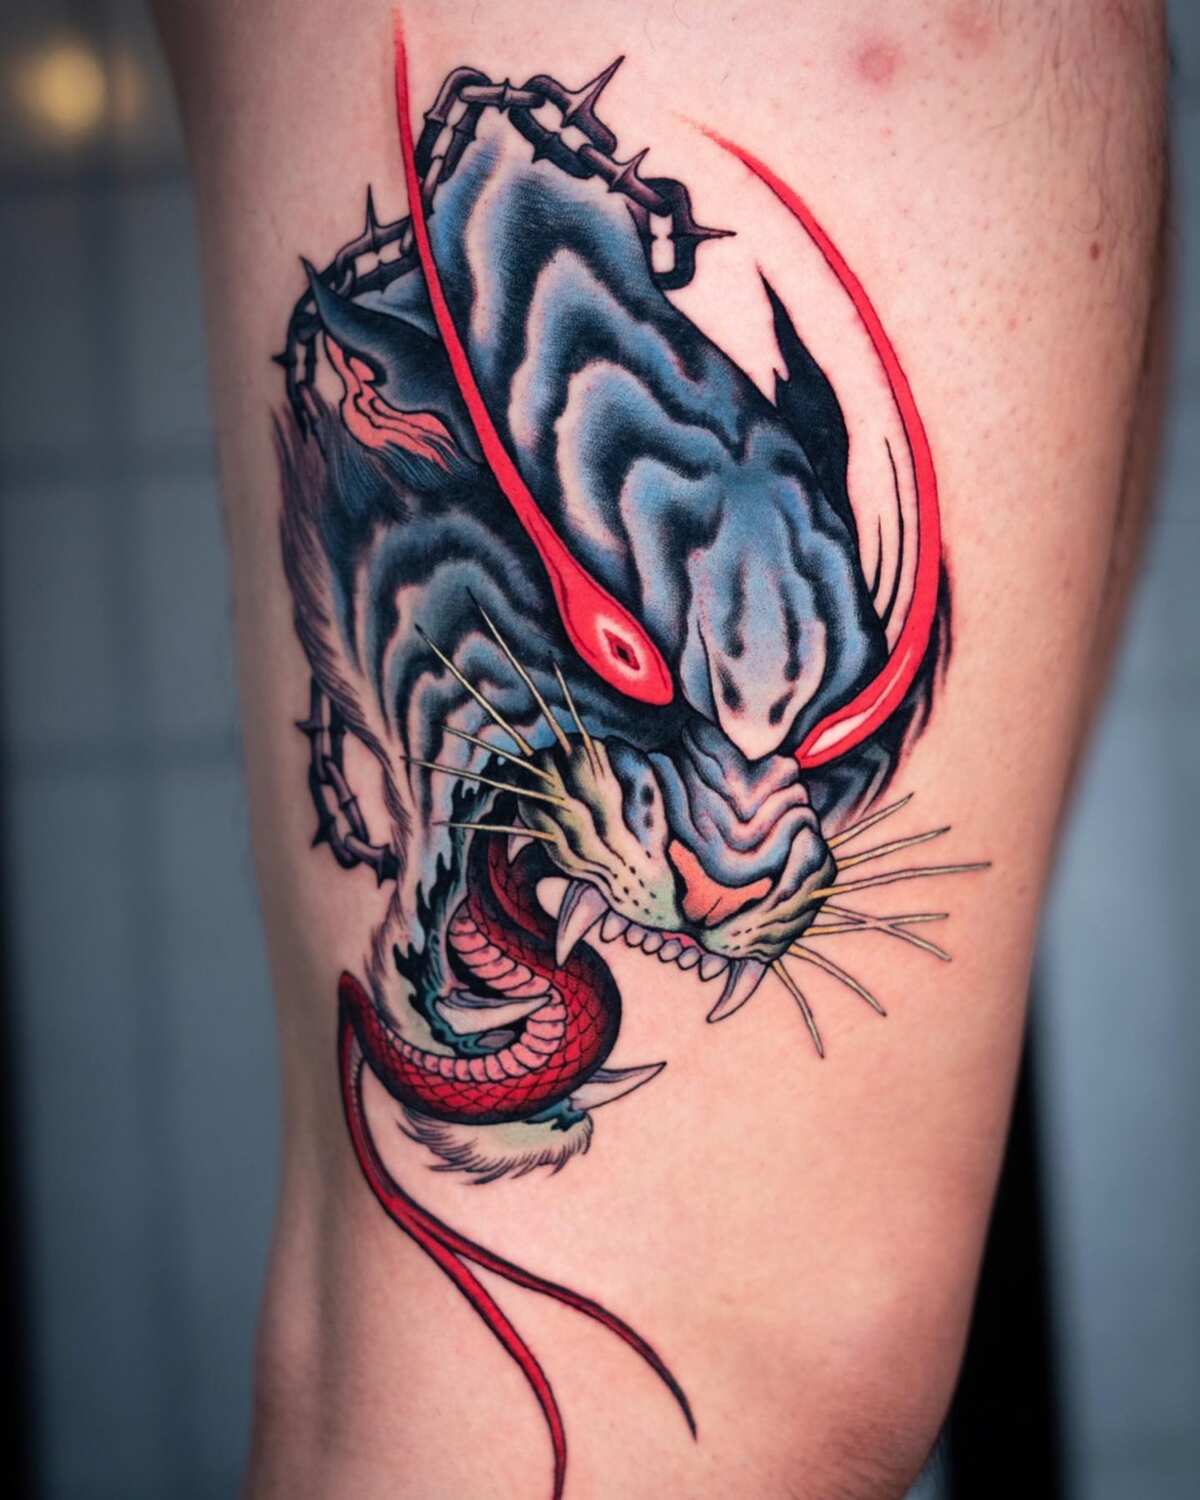 15 Japanese tiger tattoo designs and ideas that will convince you